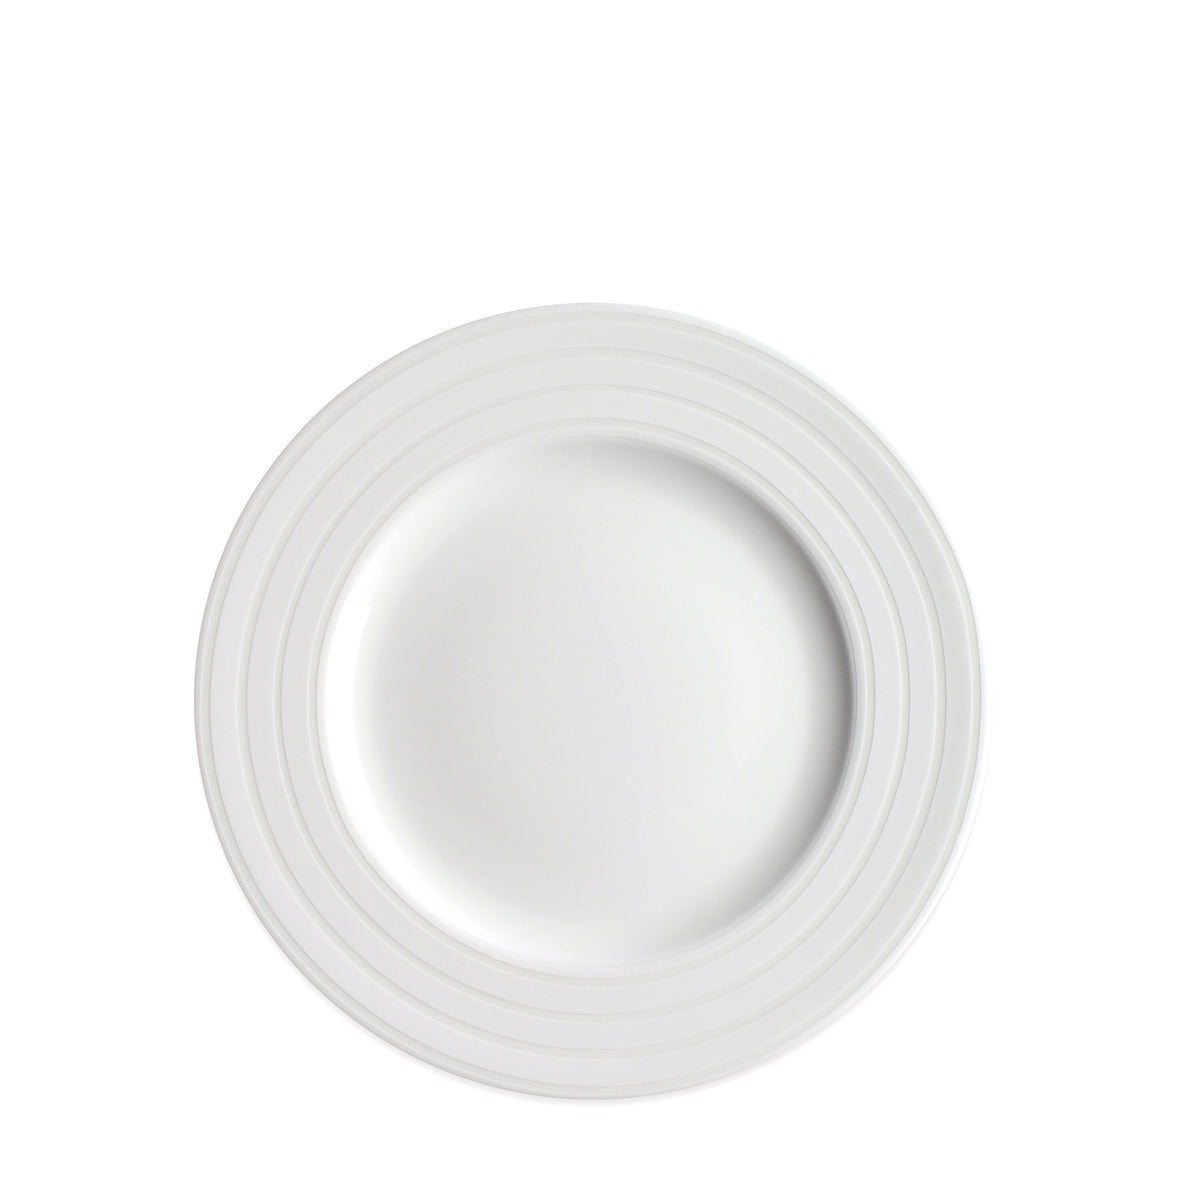 A Cambridge Stripe Rimmed Salad Plate with a slightly raised, grooved rim and a smooth center is crafted from high-fired porcelain for durability and elegance by Caskata Artisanal Home.